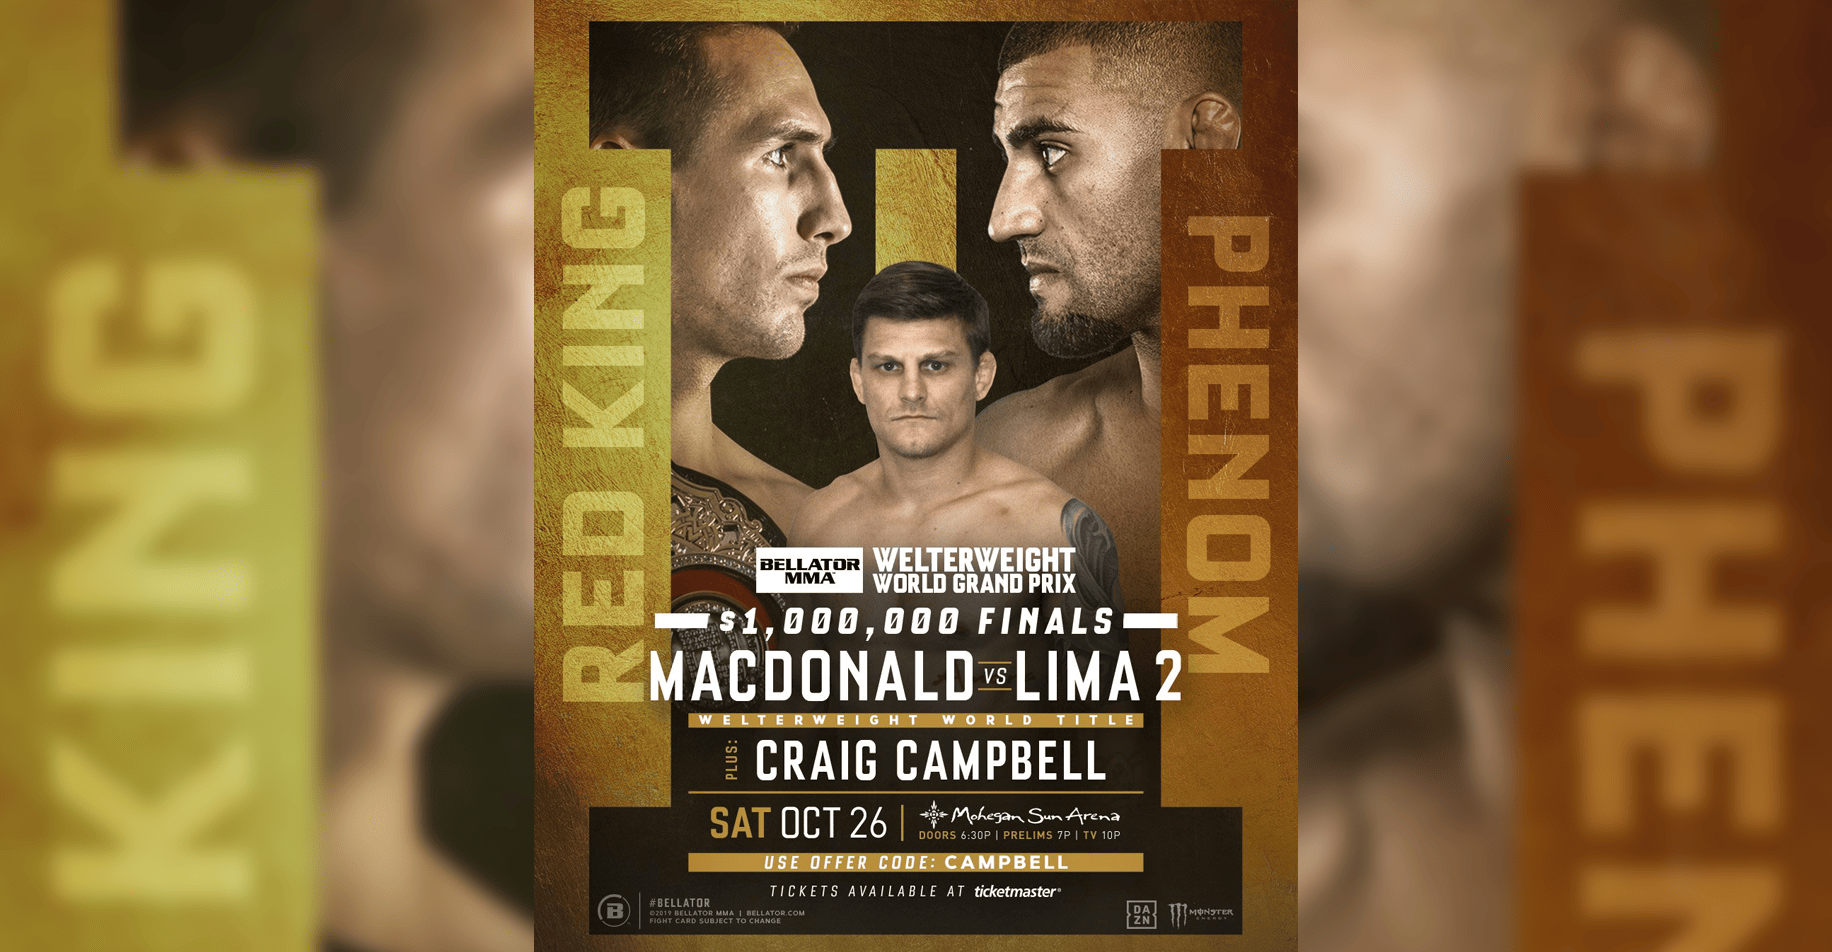 Bellator 232 Douglas Lima attempts to reclaim Bellator welterweight gold in a rematch with Rory MacDonald